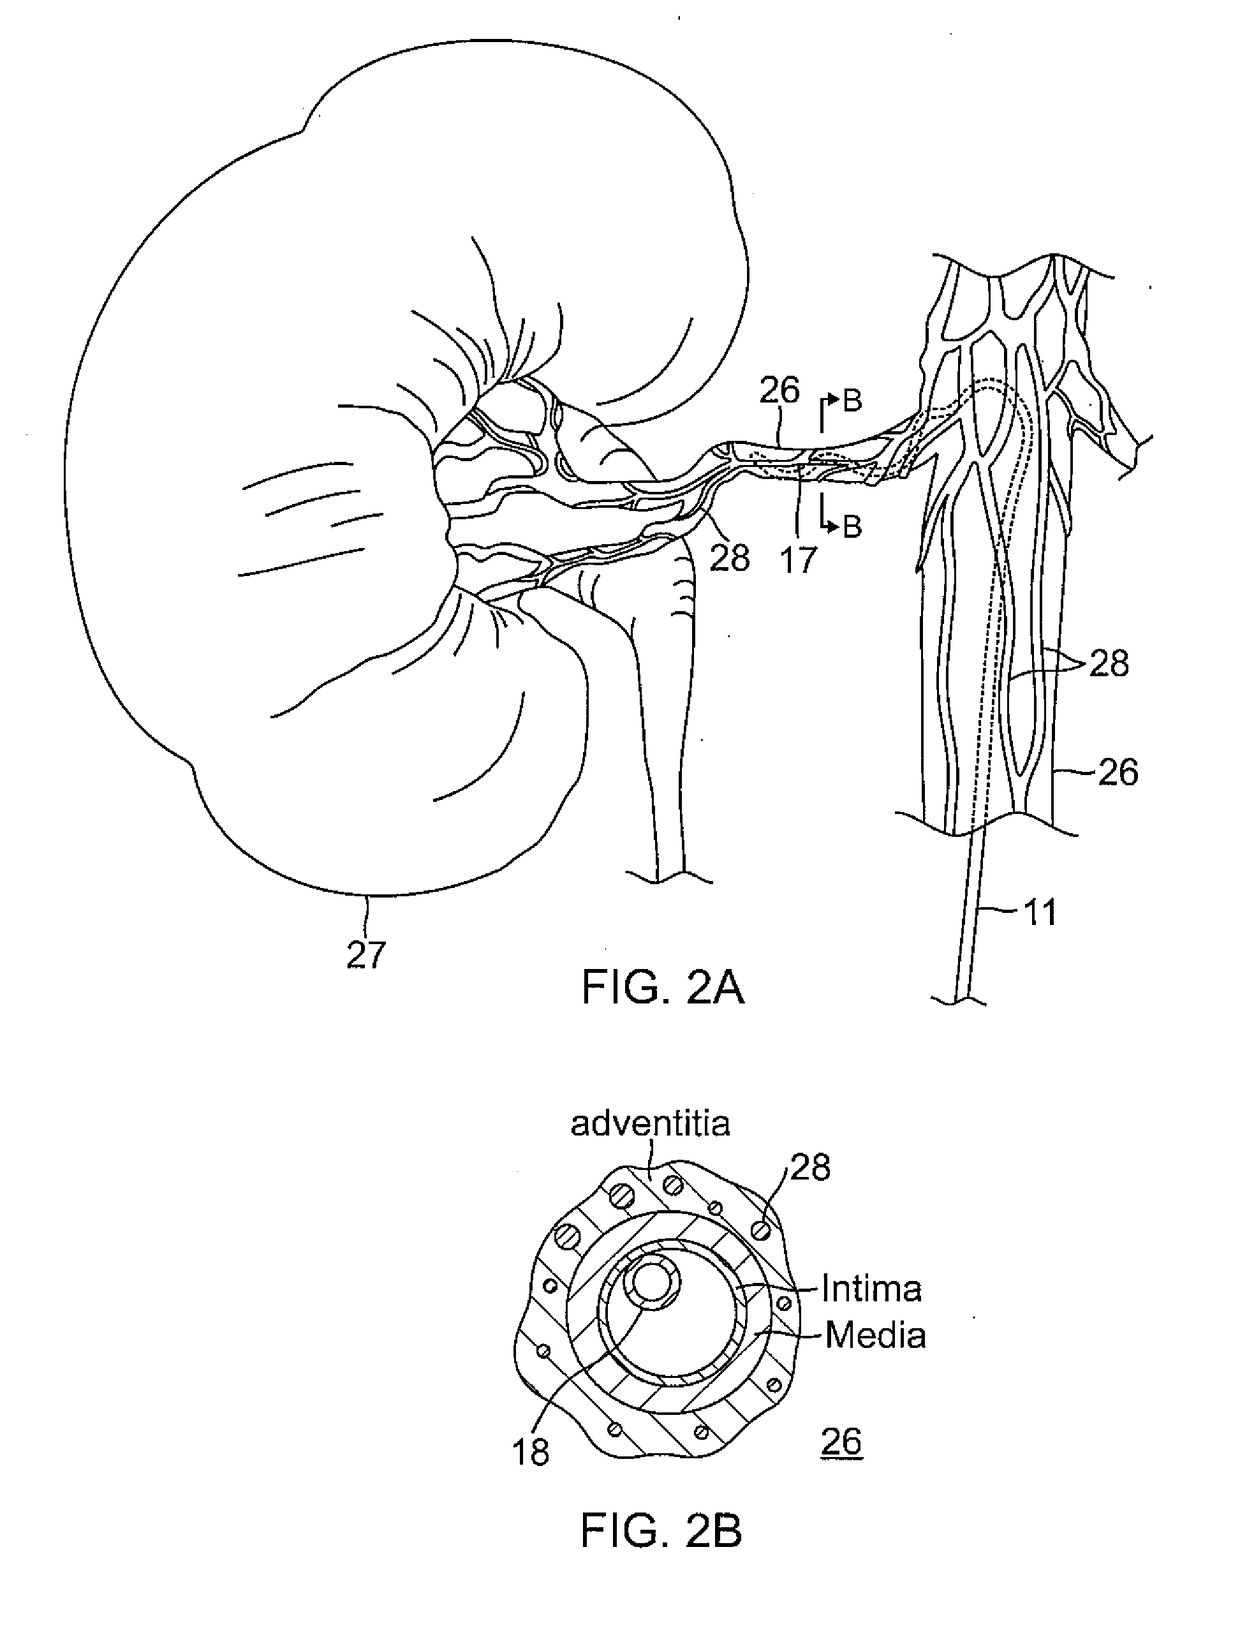 System and method for controlling catheter power based on renal ablation response